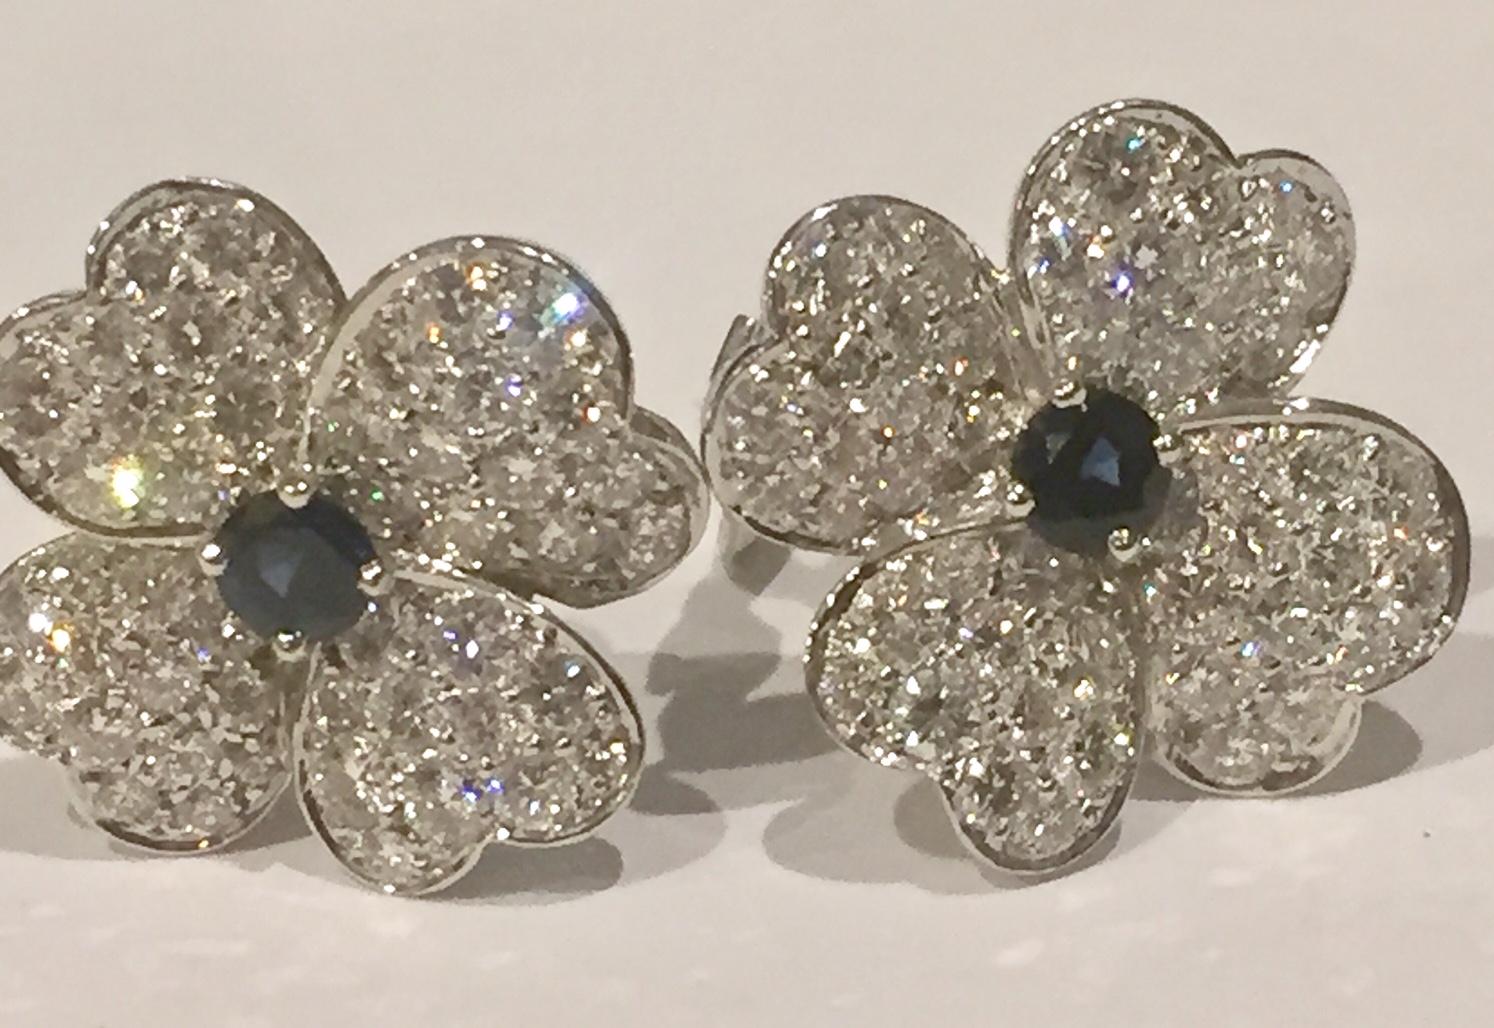 Very rare small model earrings from the cosmos collection by Van Clef & Arpels. Made in 18K yellow gold - white rhodium plated. Each flower-shaped earring features a prong-set faceted sapphire of around 0.45 ct. surrounded by  four petals pave-set